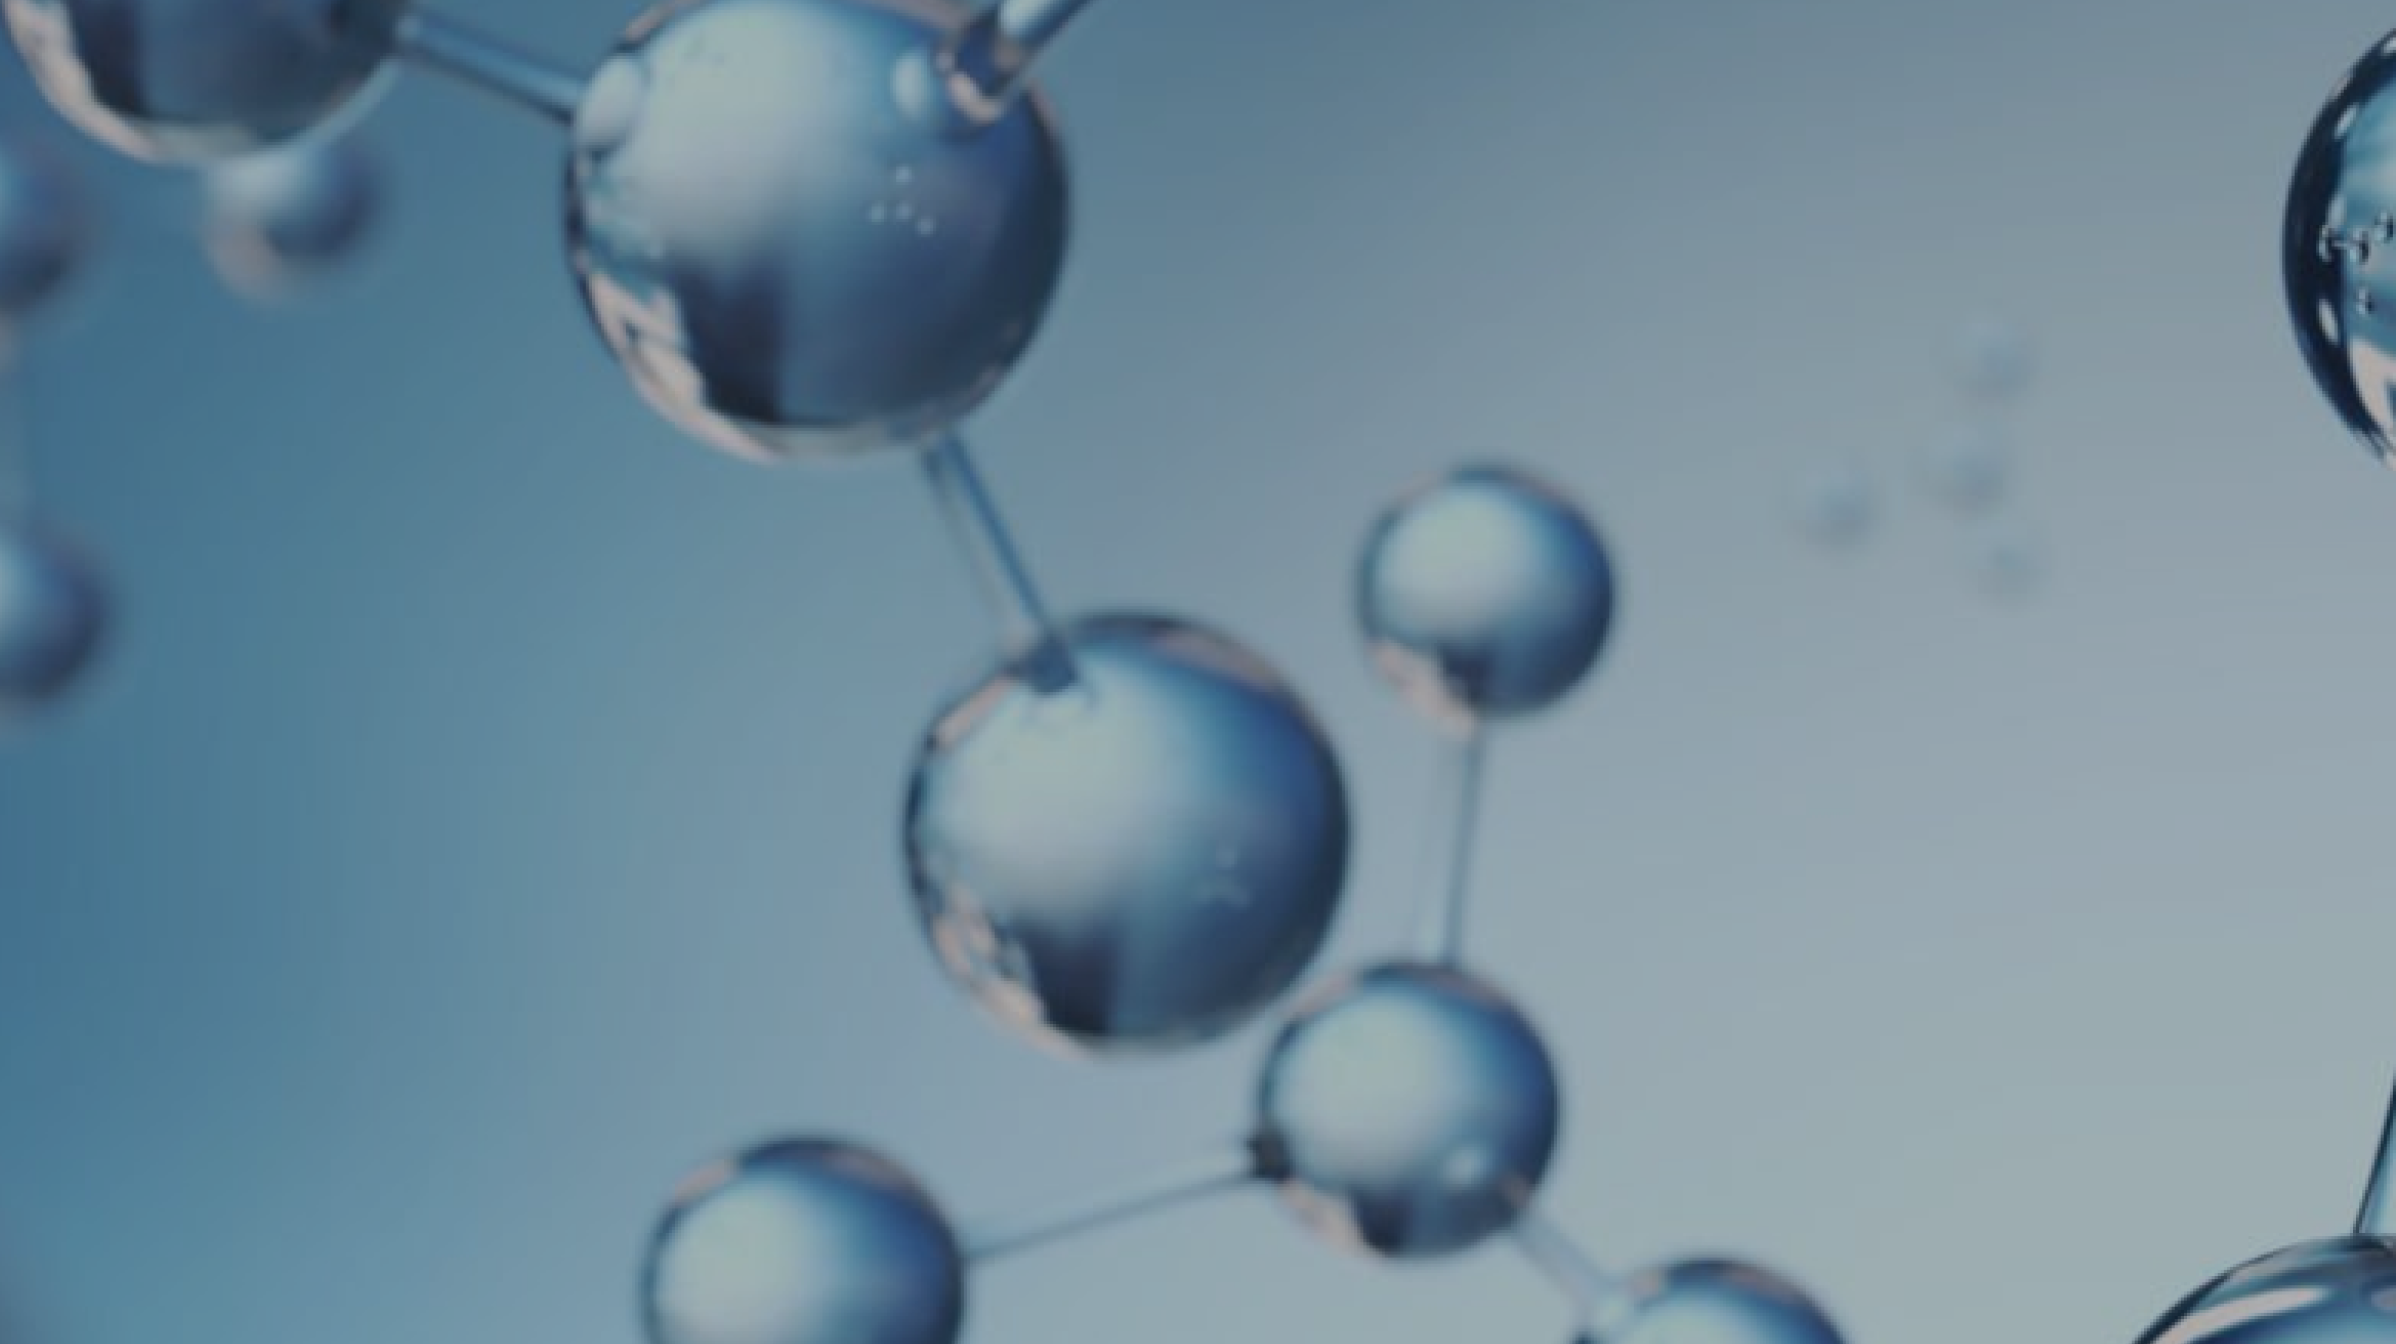 Abstract image of atoms and molecules in light blue shades